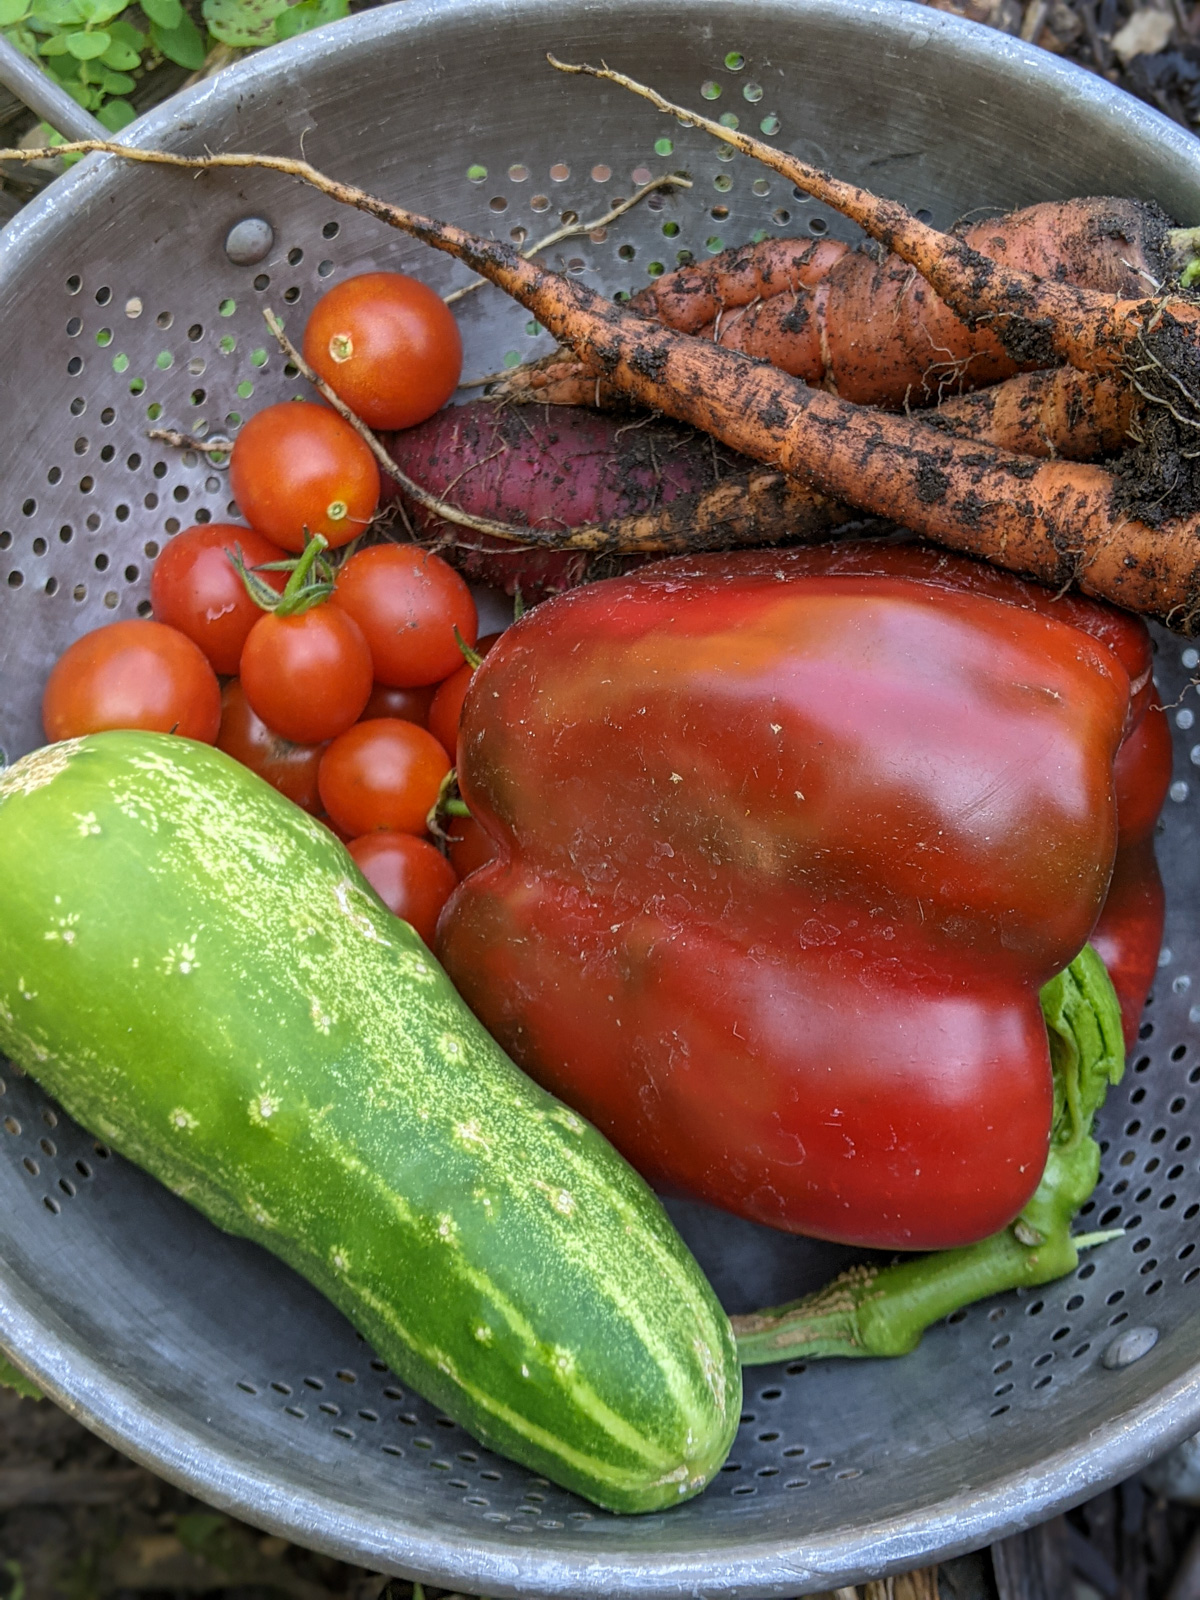 Fresh raw veggies picked from the garden in a collander, tomato, peppers, carrot and cucumber.